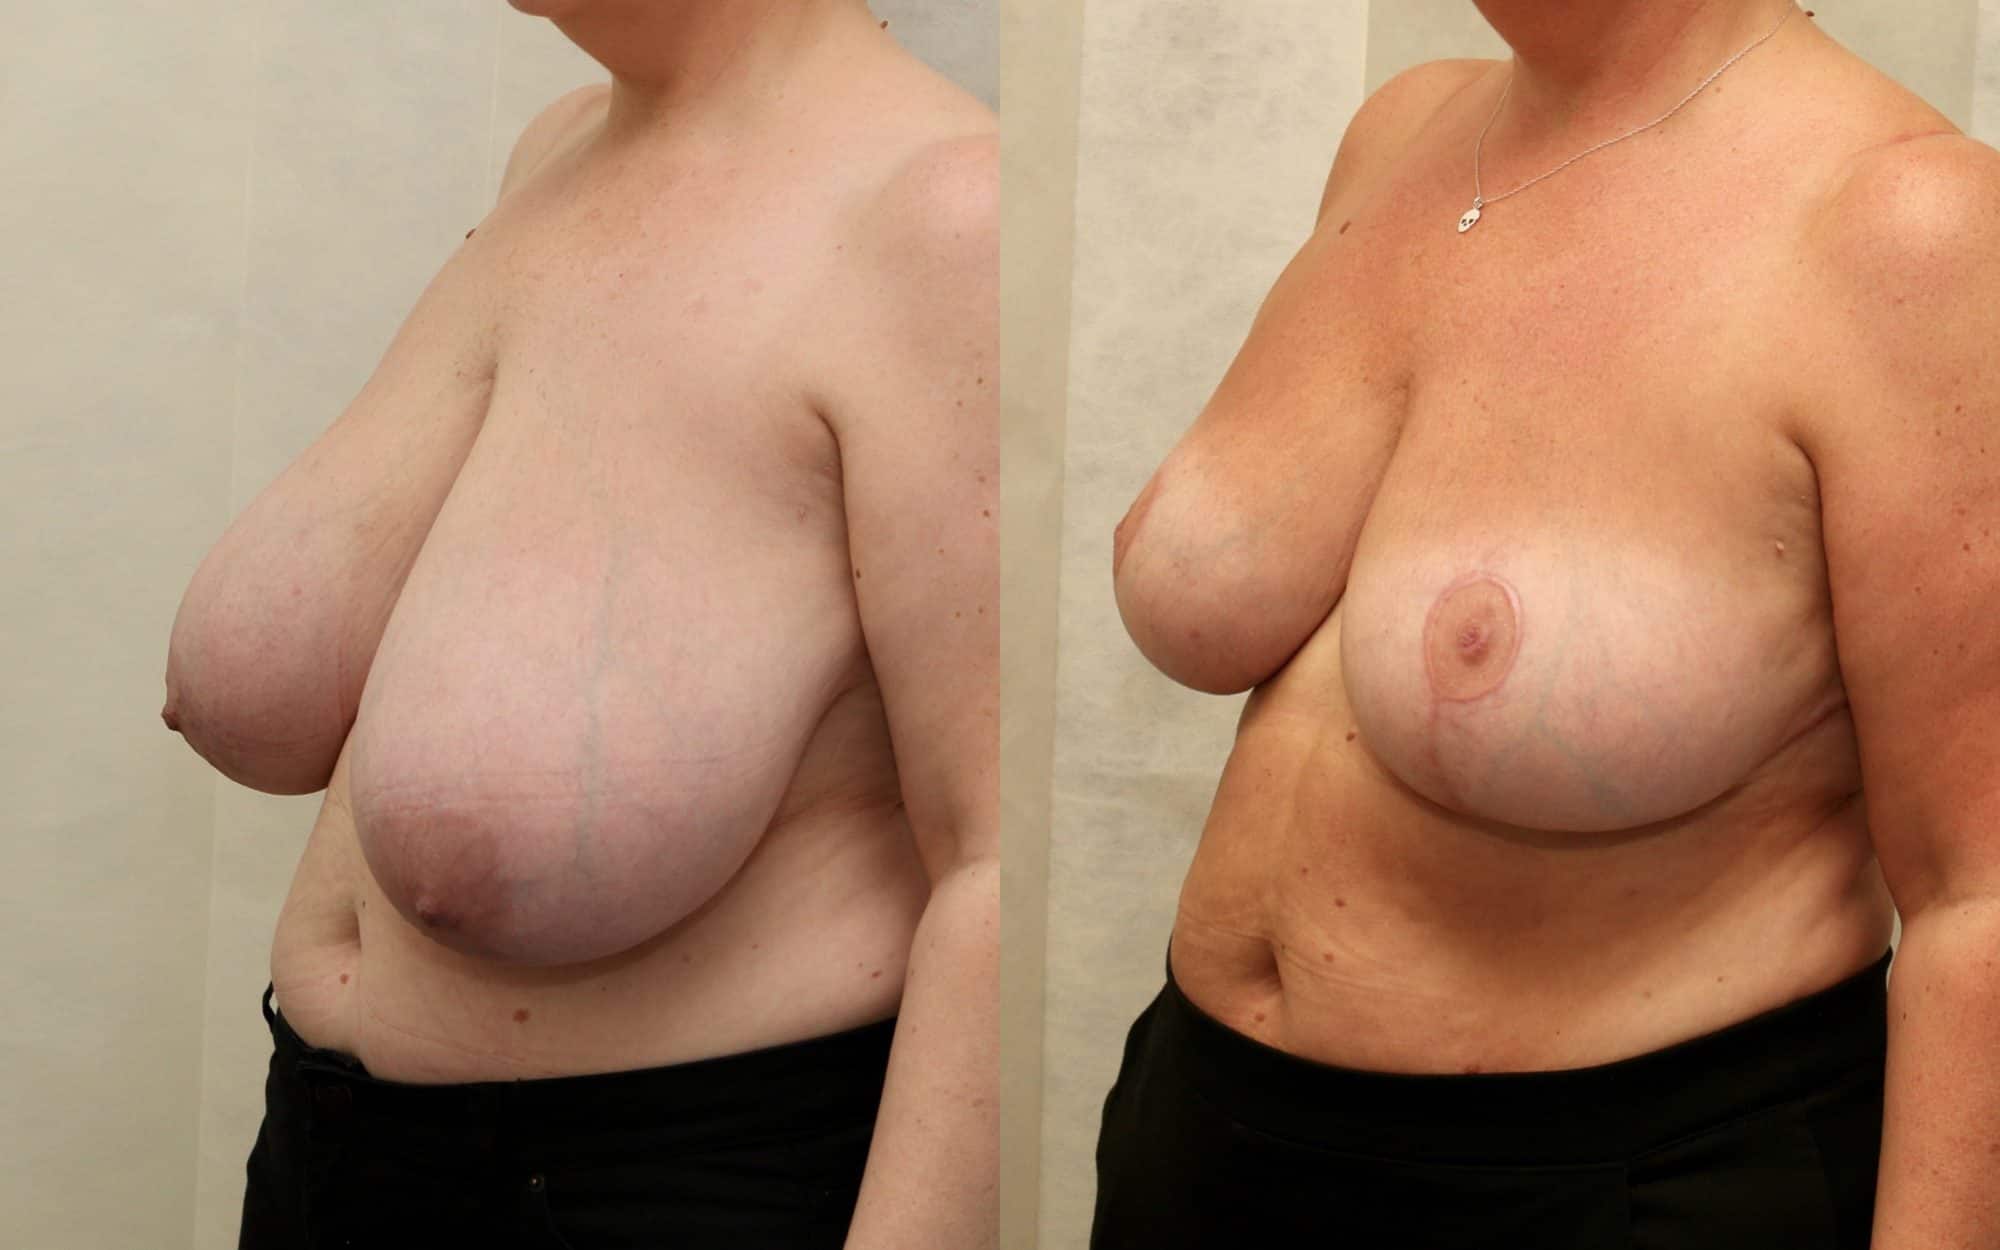 Large breast reduction with asymmetry before and after